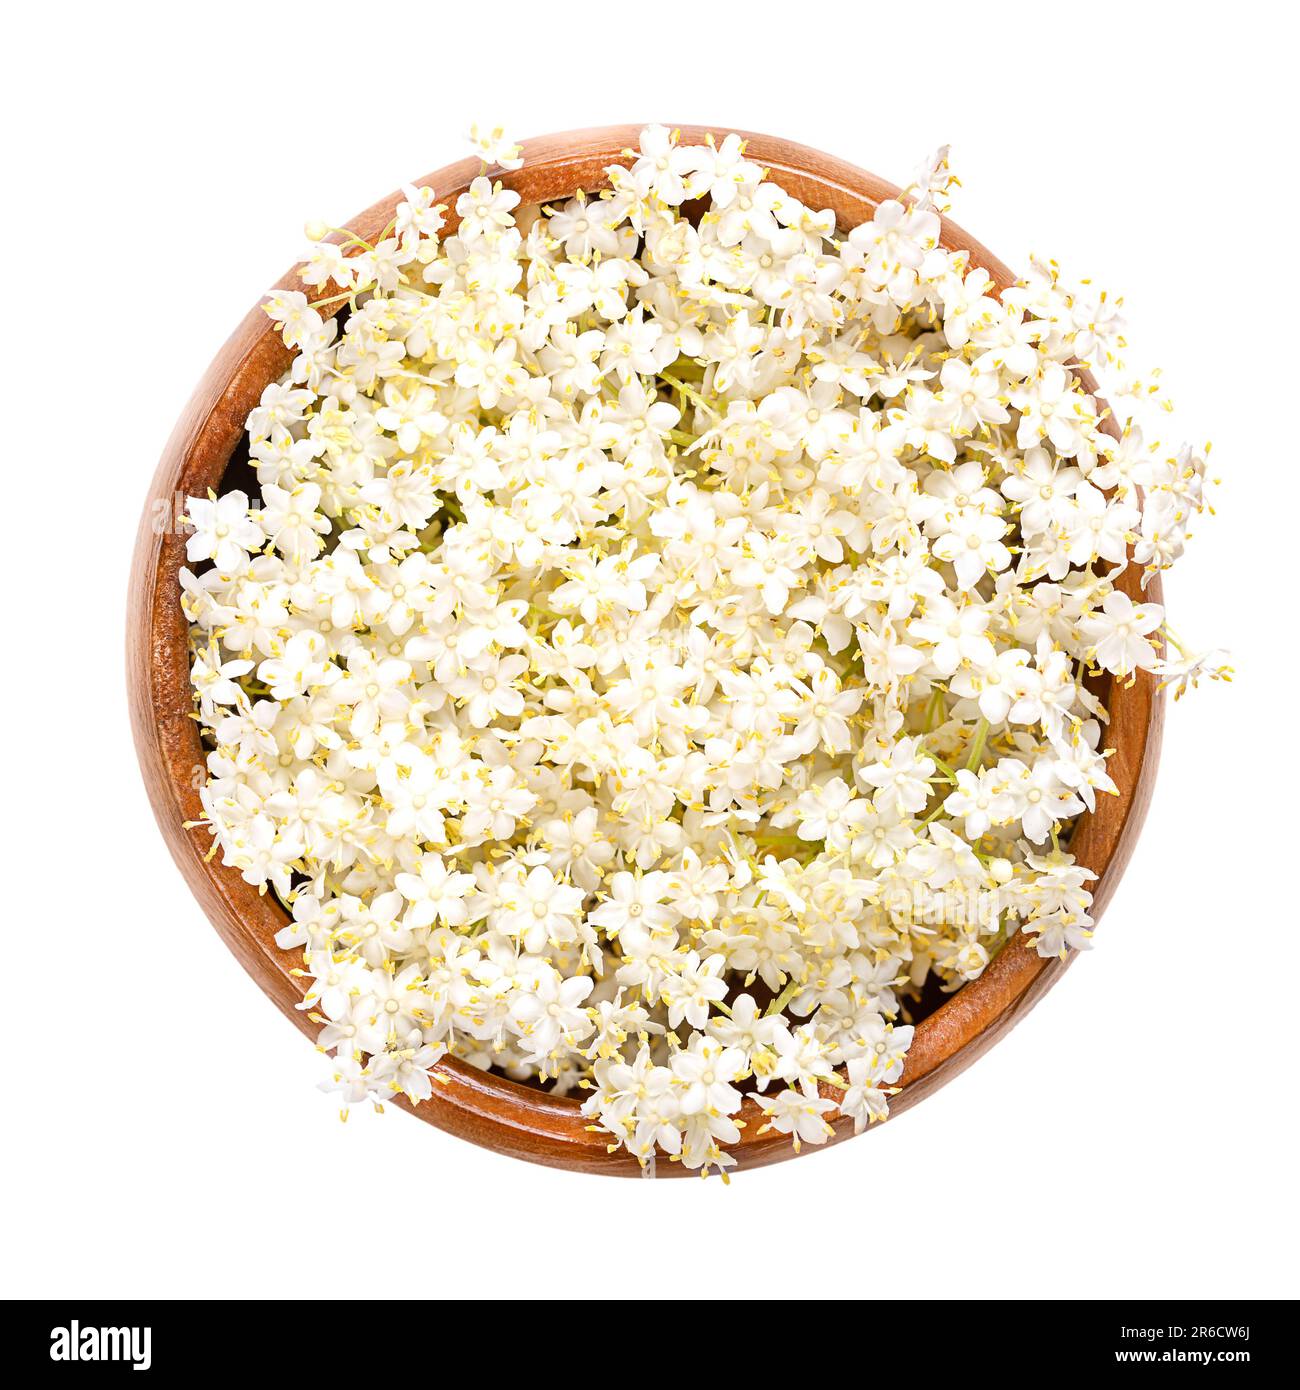 Fresh flowers of of European black elder, in a wooden bowl. Blossoms of Sambucus, also known as elderflower, used as tea in traditional medicine. Stock Photo